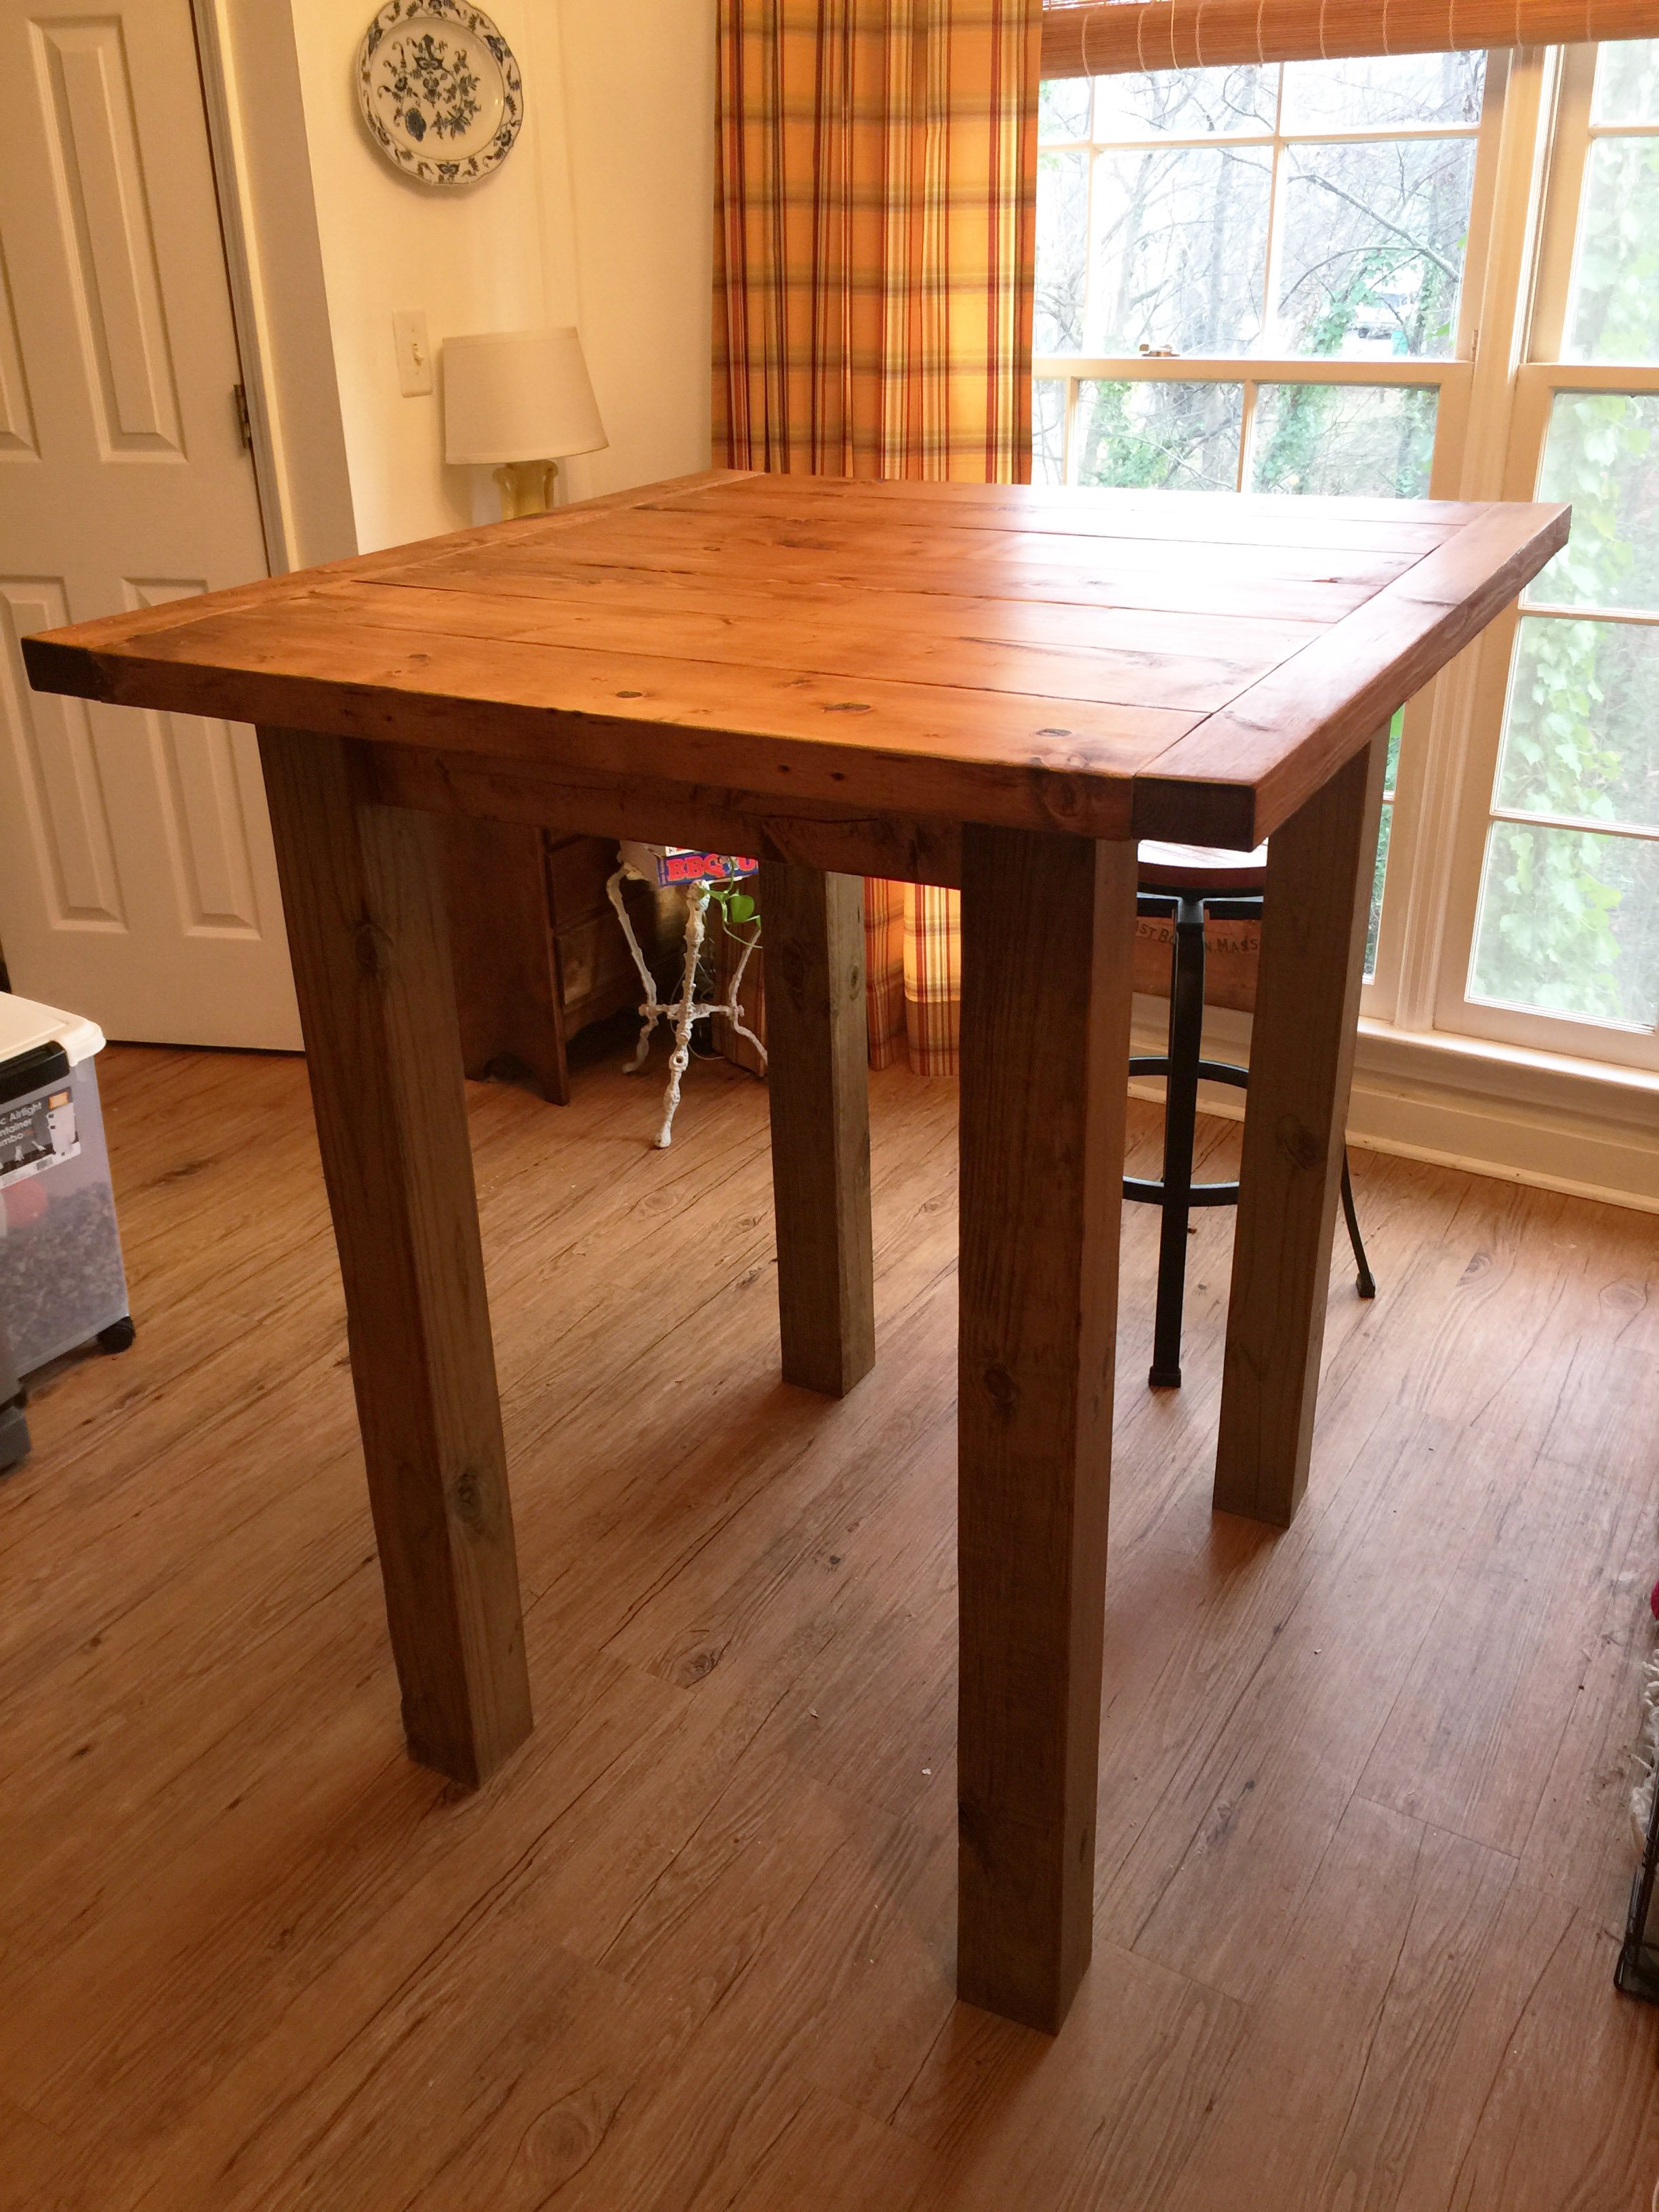 Ana White Small Pub Table - DIY Projects